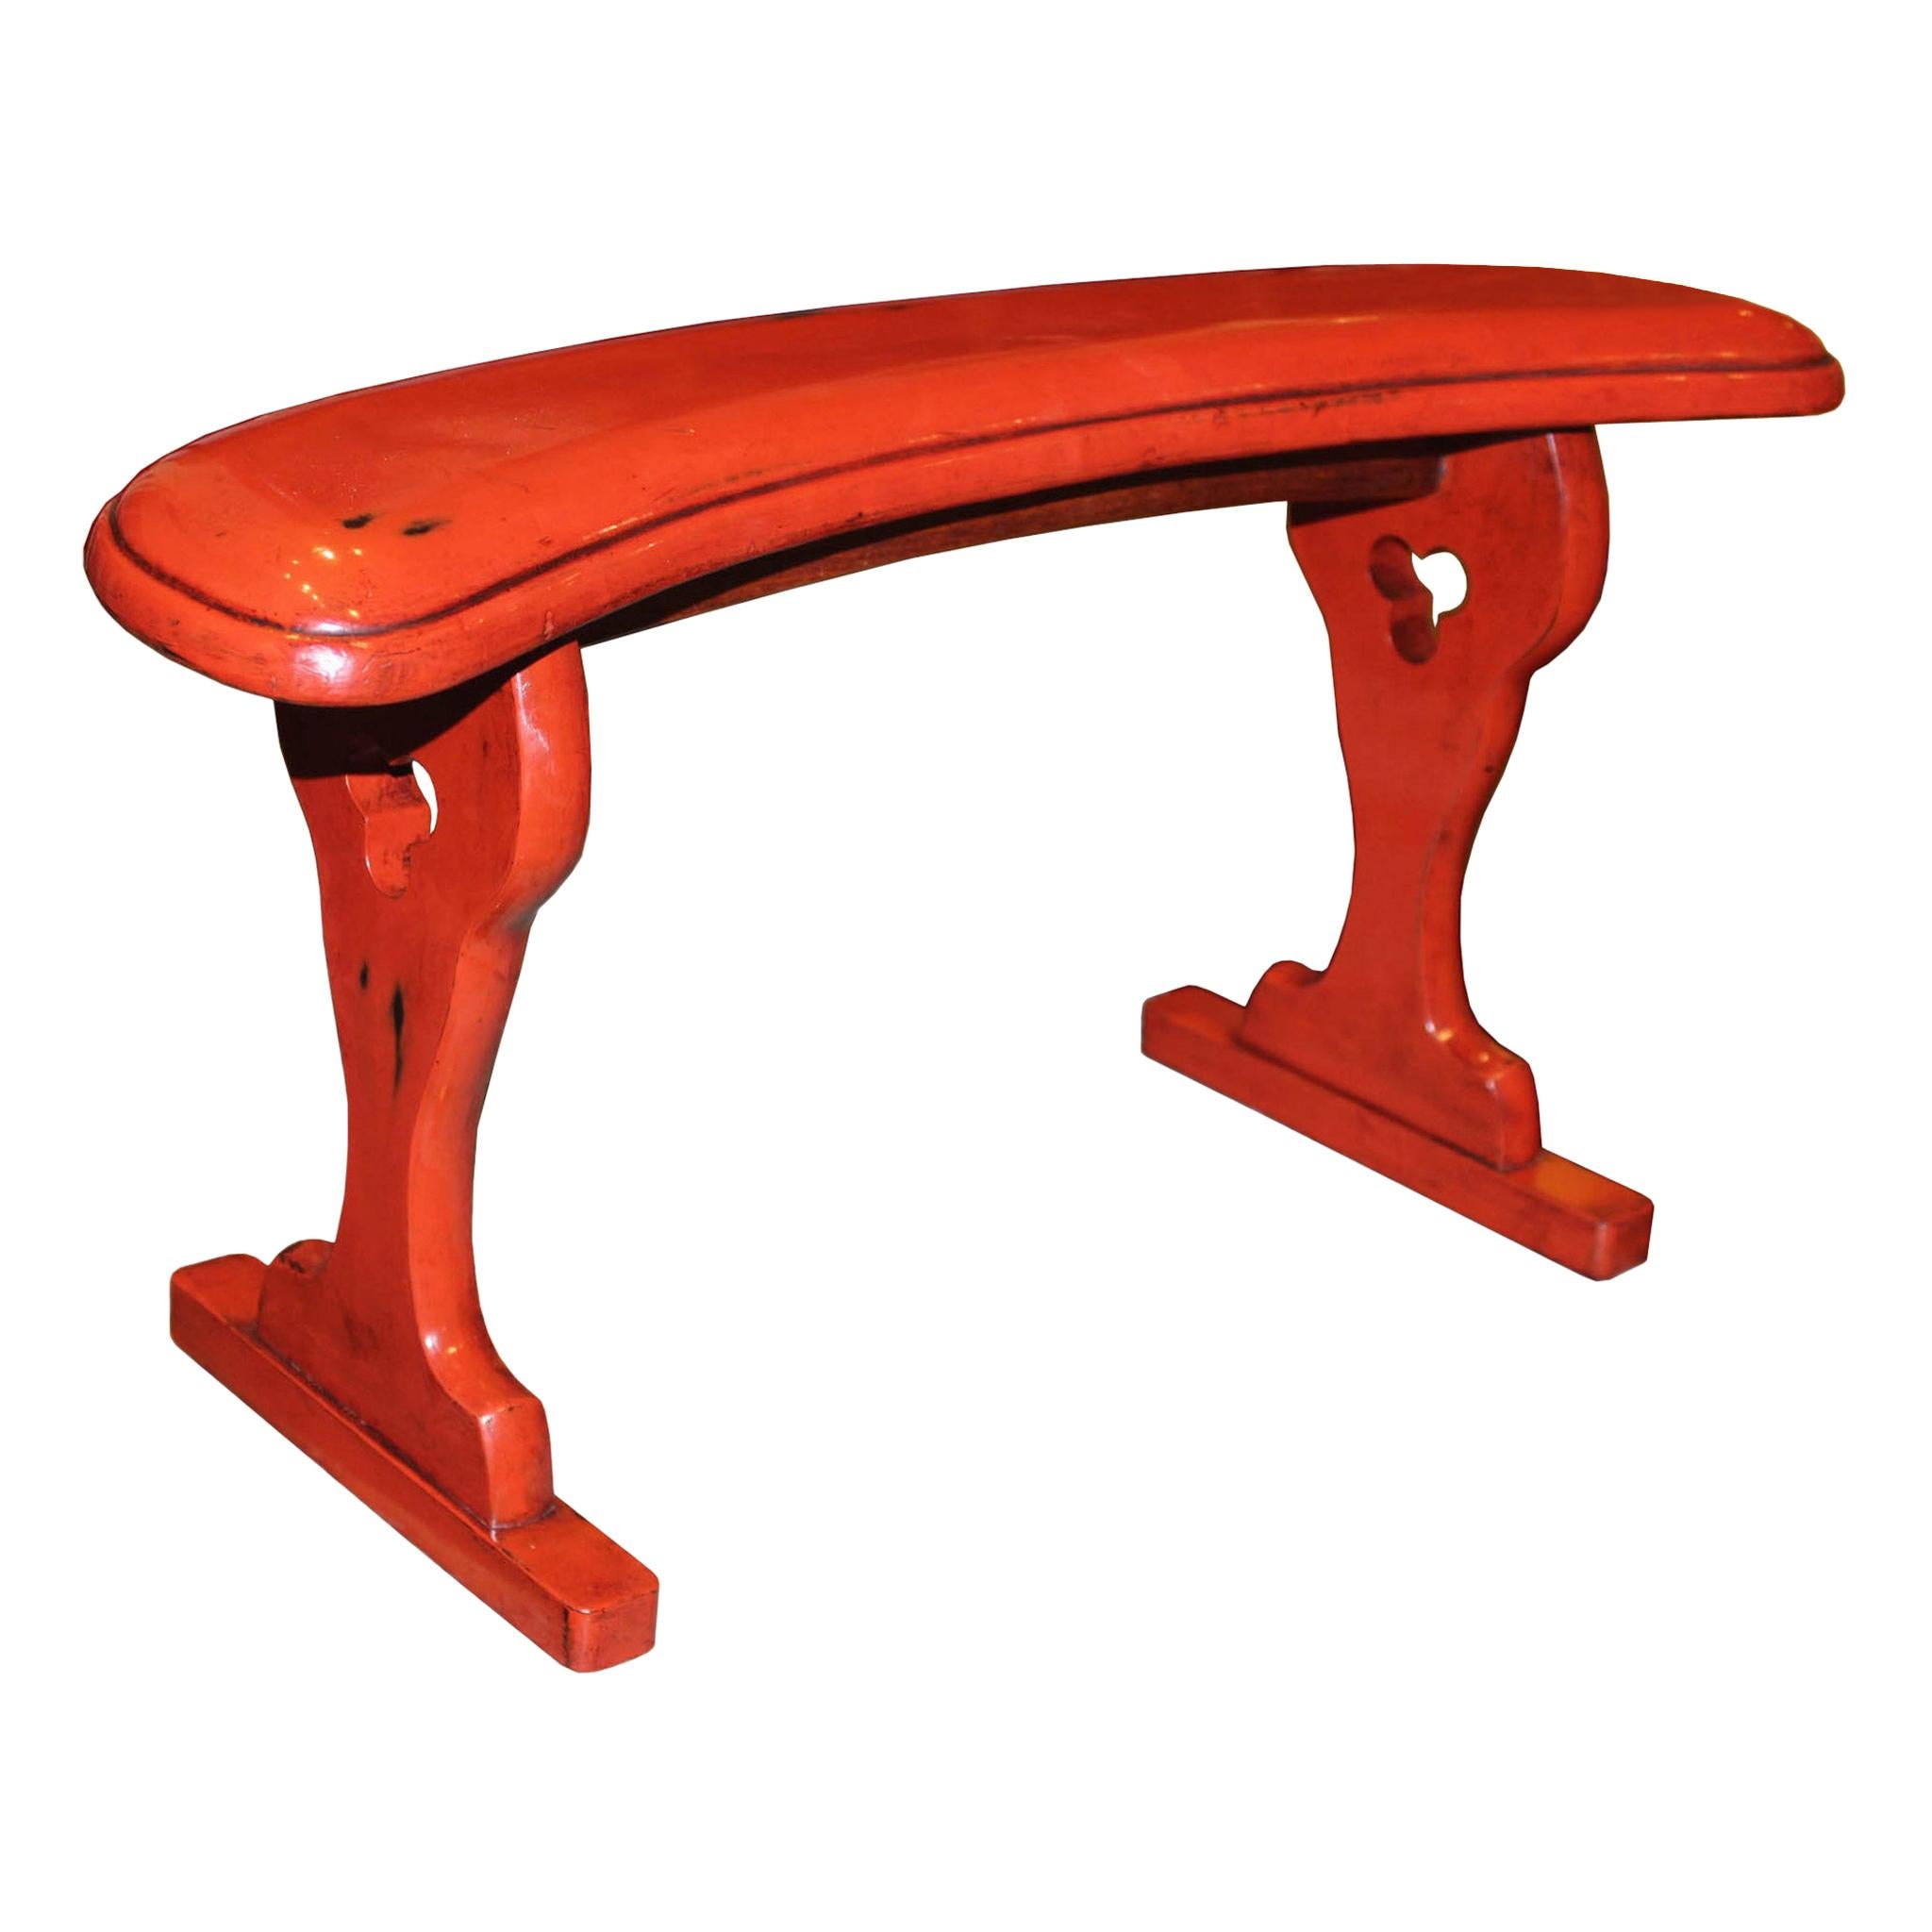 Japanese Red Lacquer Arm Rest